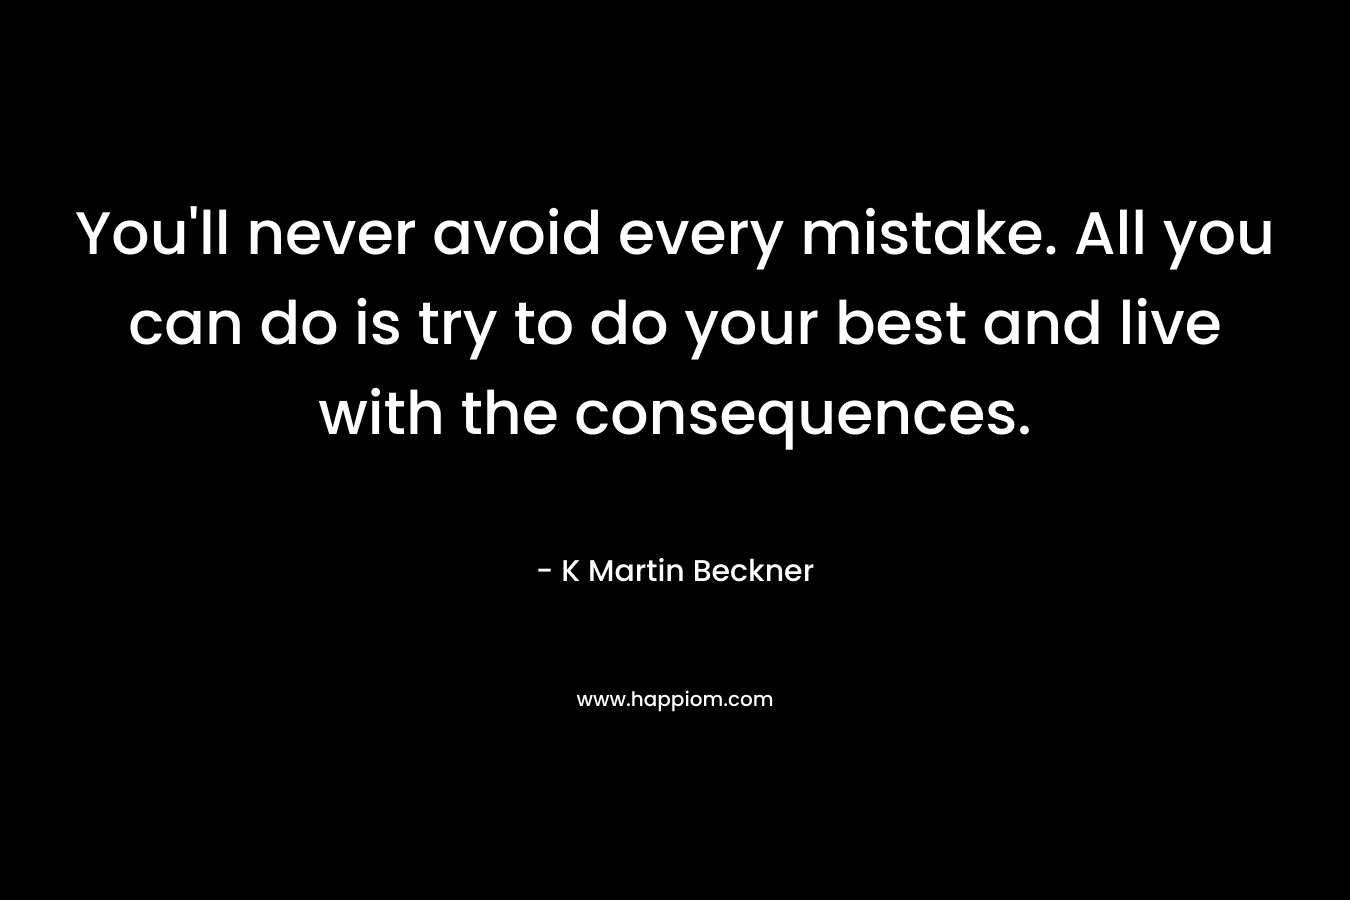 You’ll never avoid every mistake. All you can do is try to do your best and live with the consequences. – K Martin Beckner